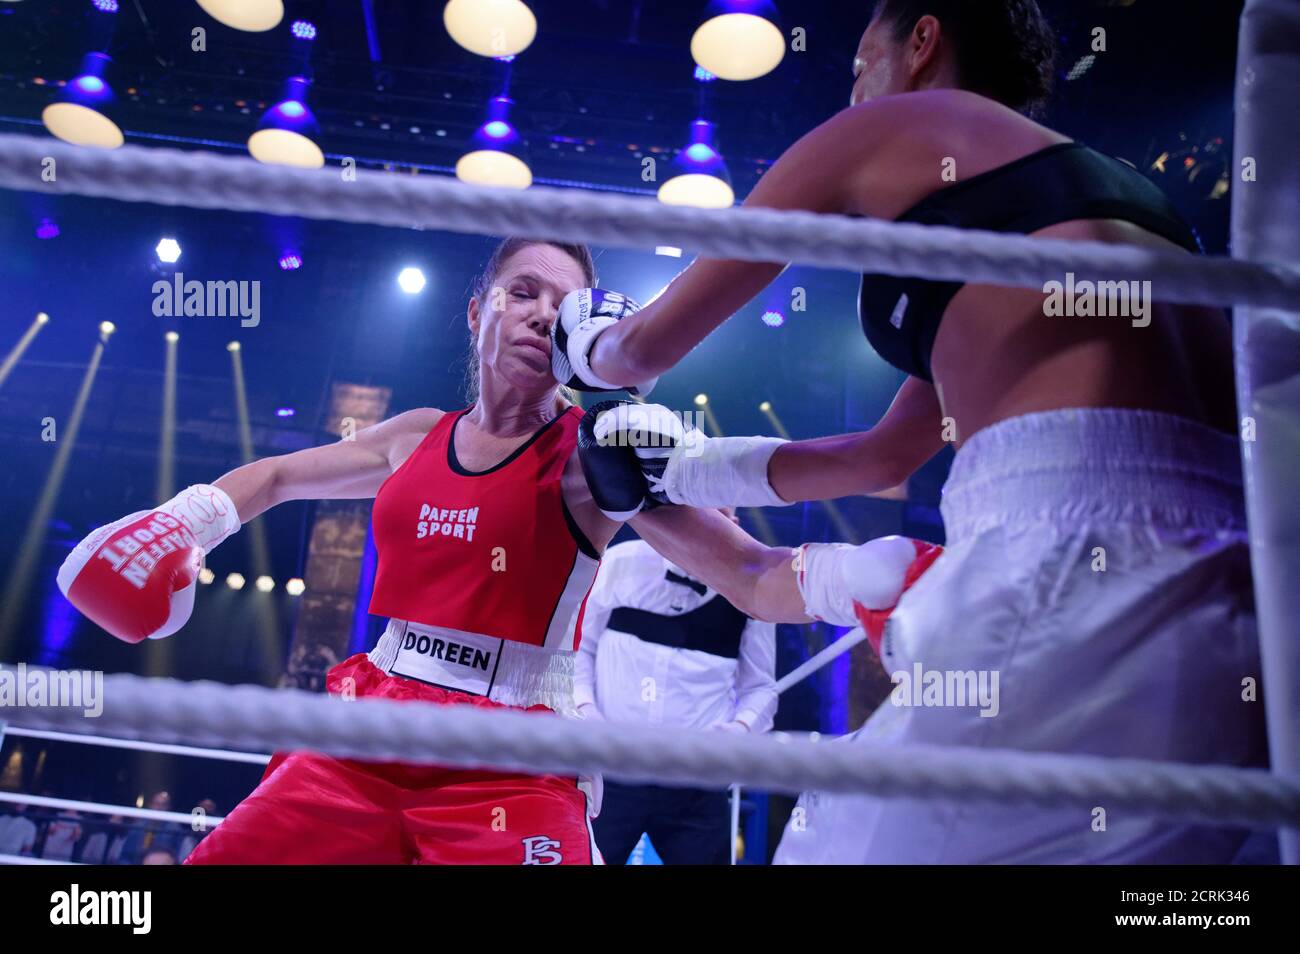 Cologne, Germany. 18th Sep, 2020. Actress Doreen Dietel (l) and model  Gisele Oppermann (r) fight in the boxing ring during the TV show "Das große  Sat.1 Promiboxen". Credit: Henning Kaiser/dpa/Alamy Live News